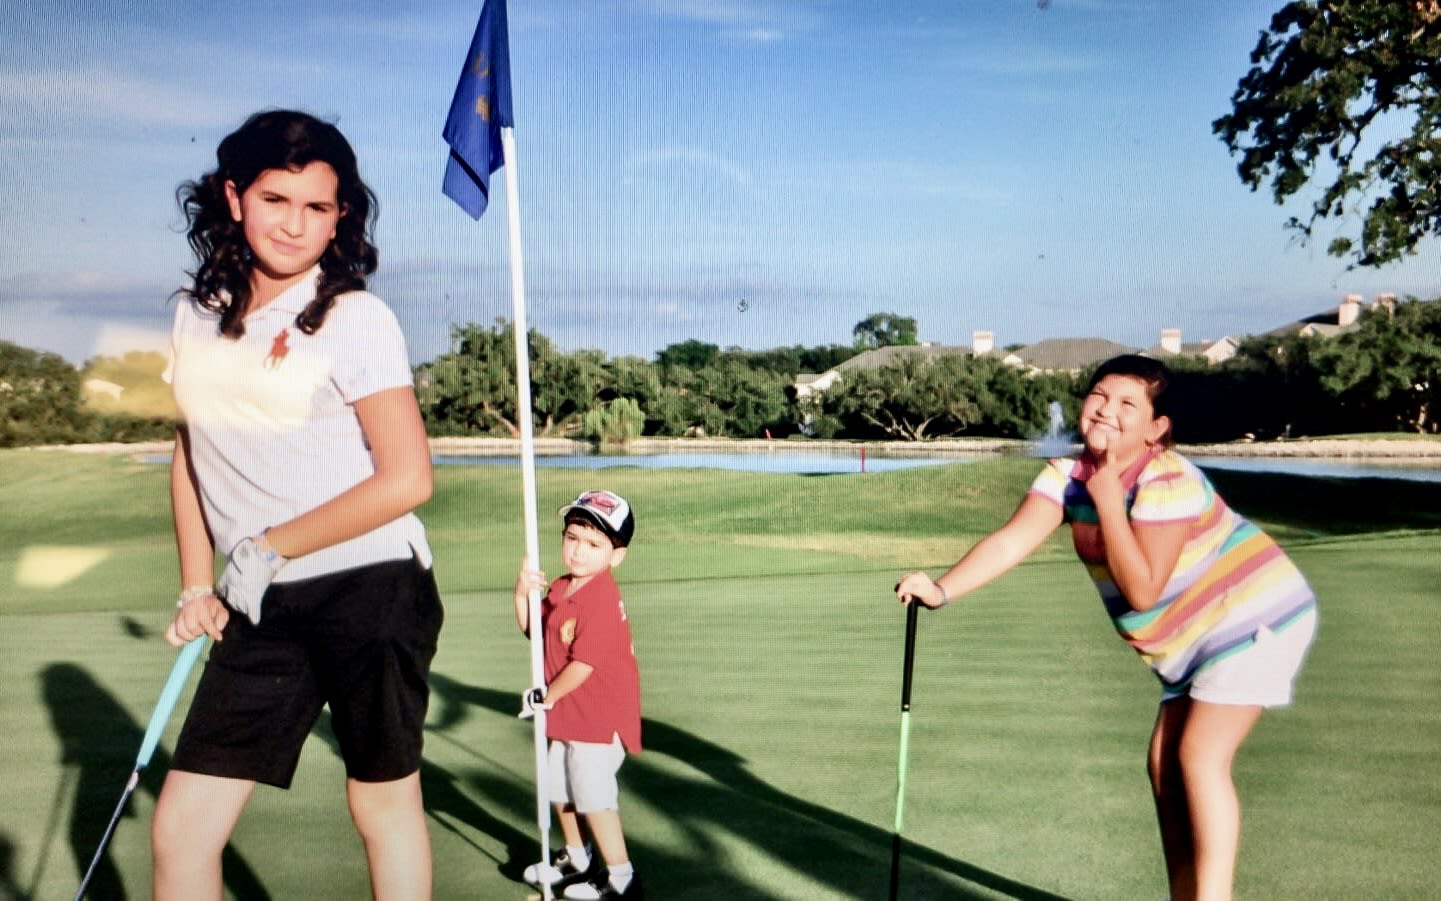 Davila (far right) and her siblings were exposed to golf early on at her father's driving range in San Antonio.